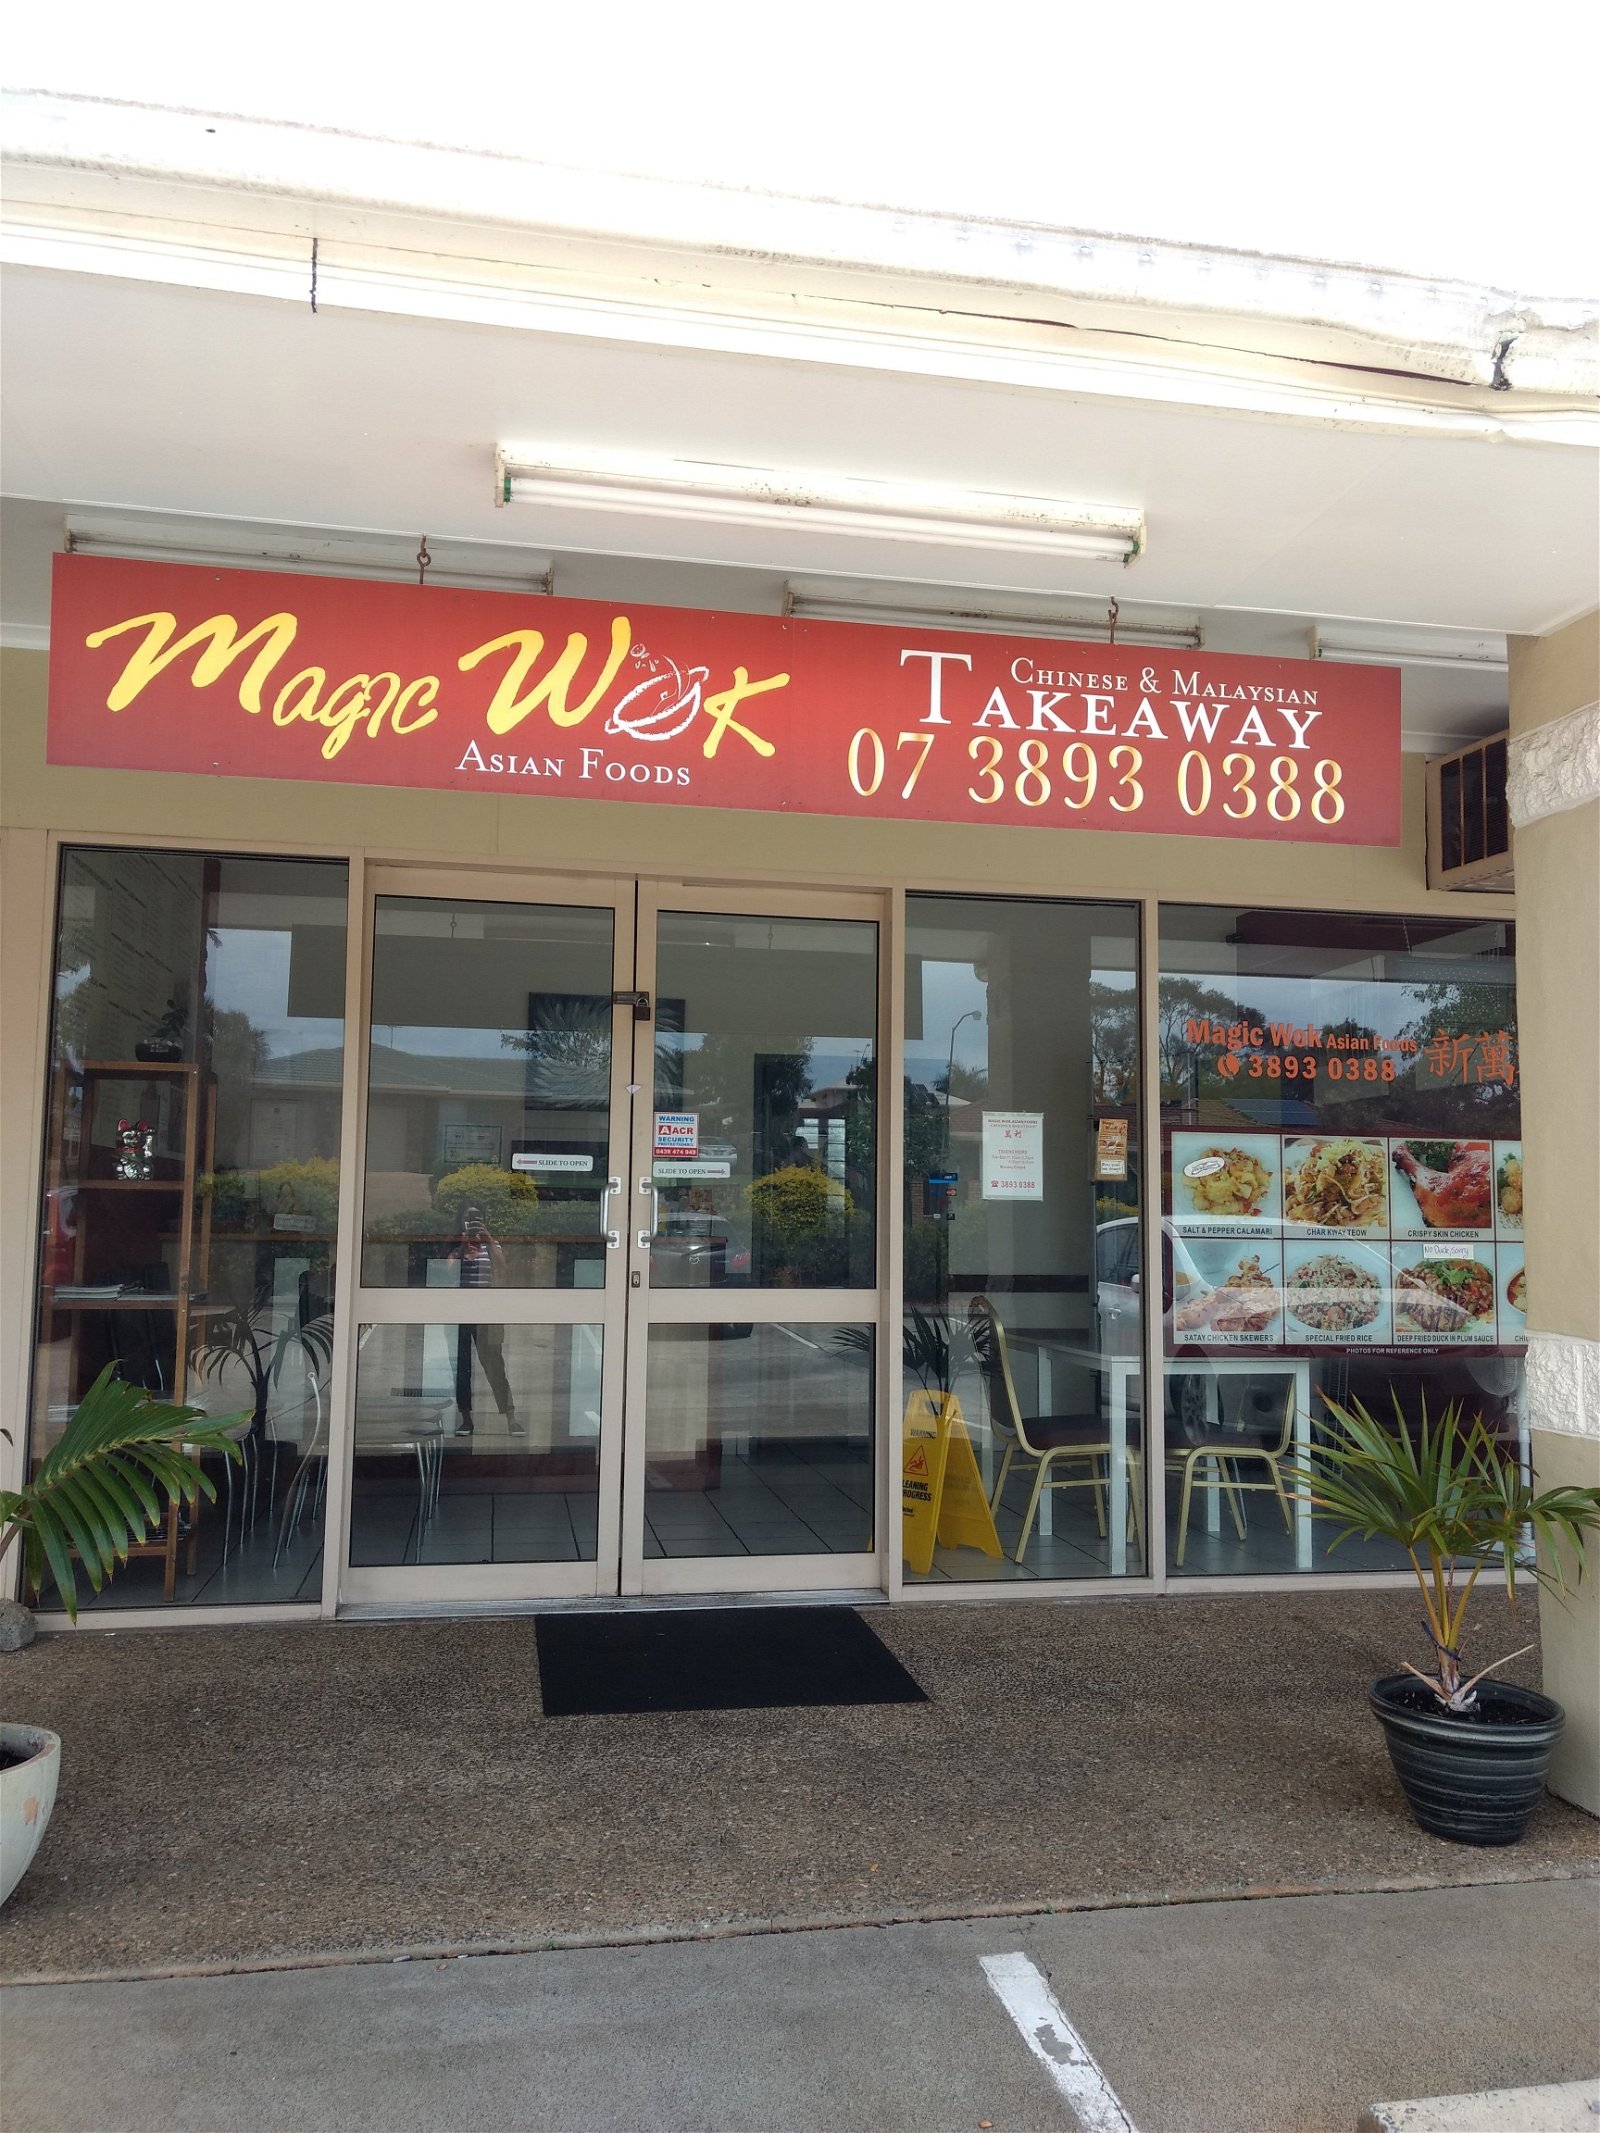 Magic Wok Asian Foods - Accommodation Find 0